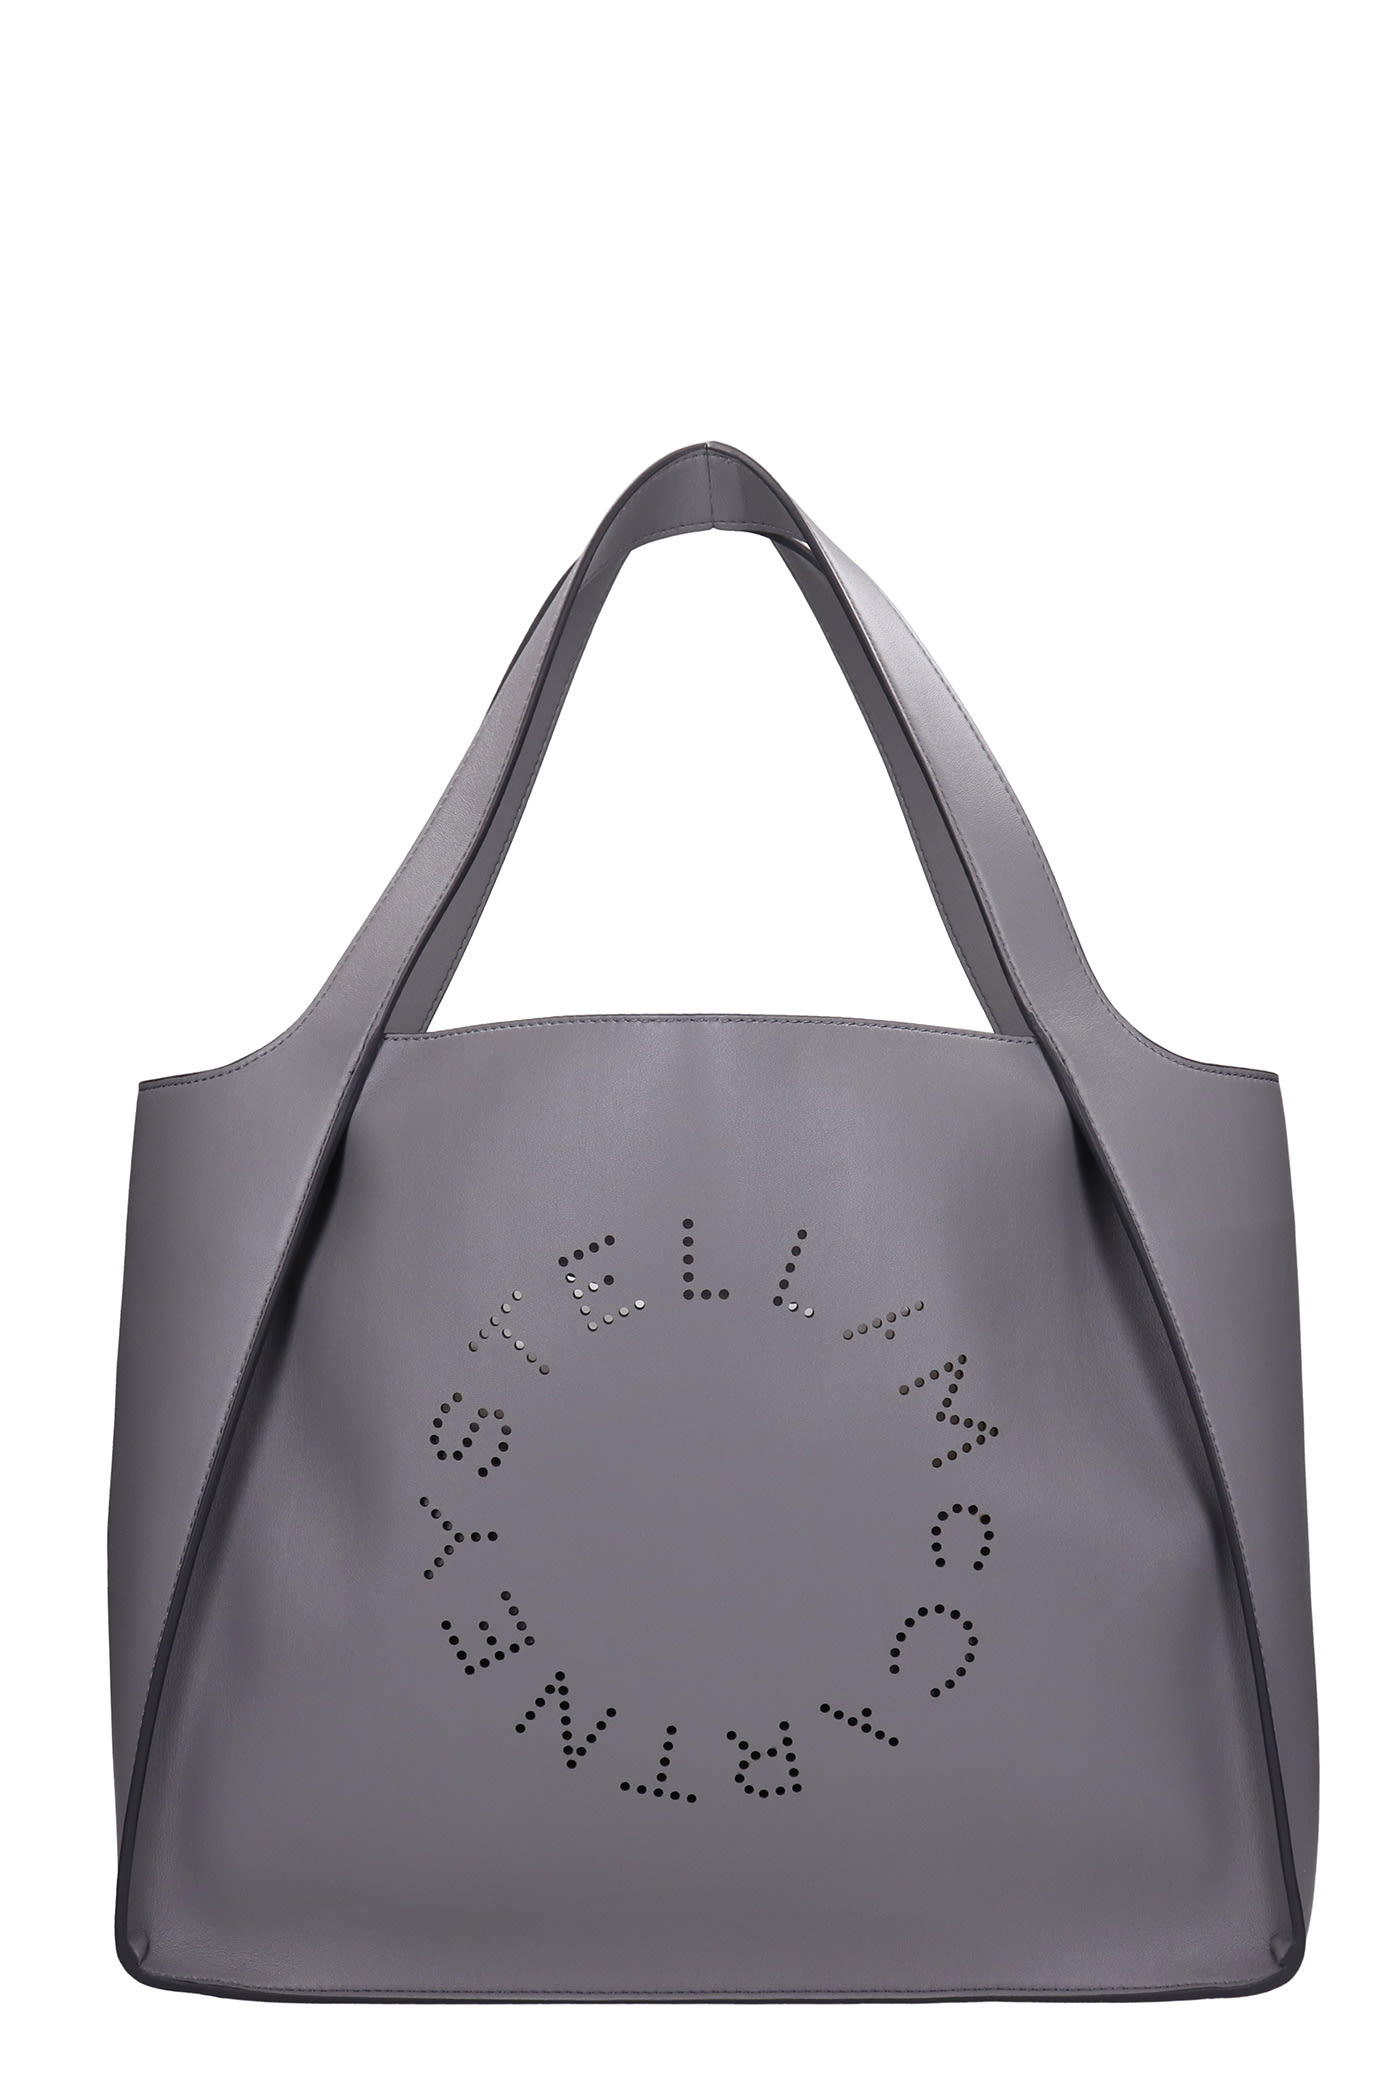 Stella McCartney Tote In Grey Faux Leather